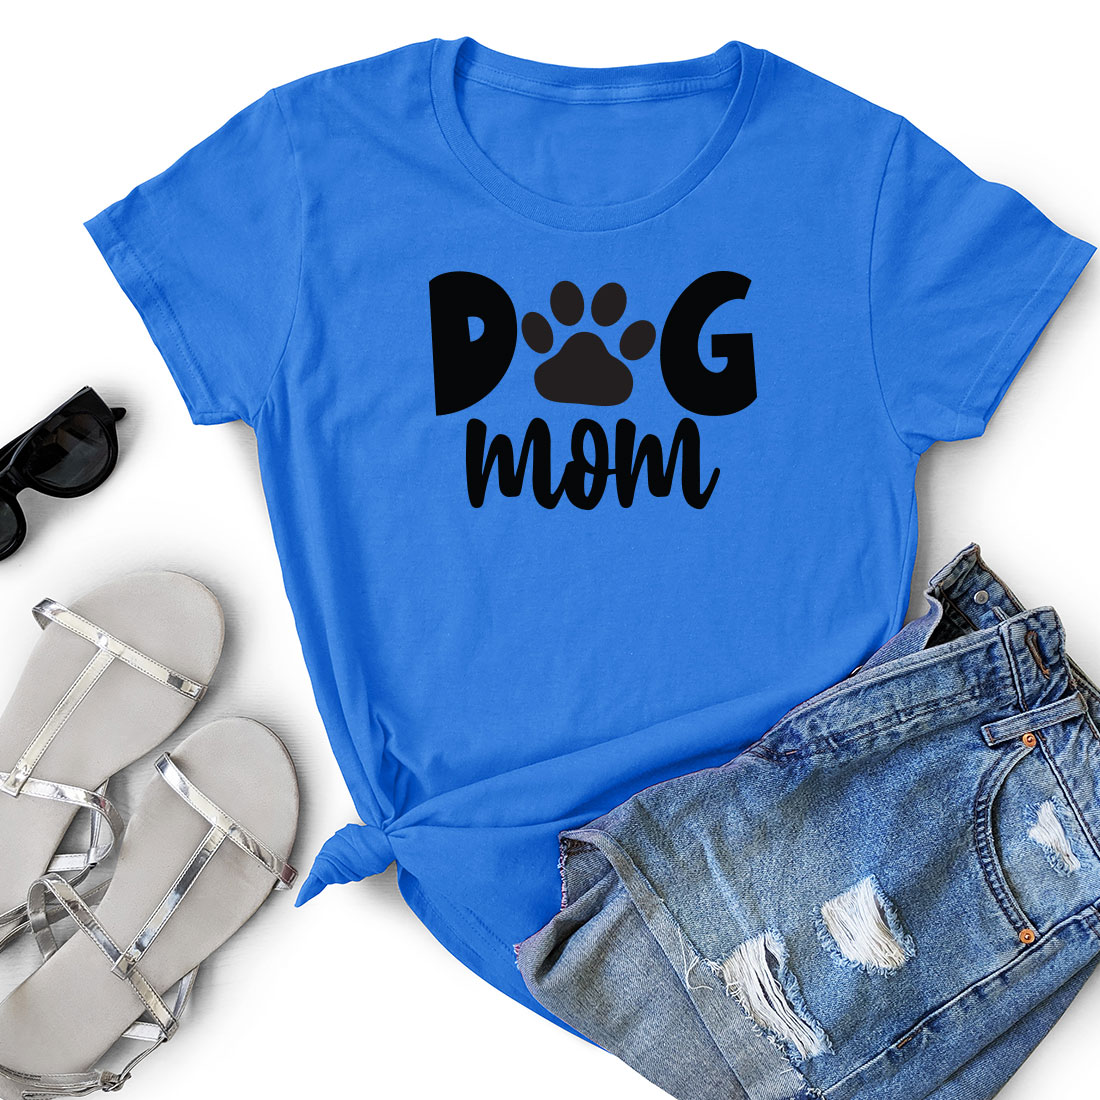 T - shirt that says dog mom next to a pair of shorts.